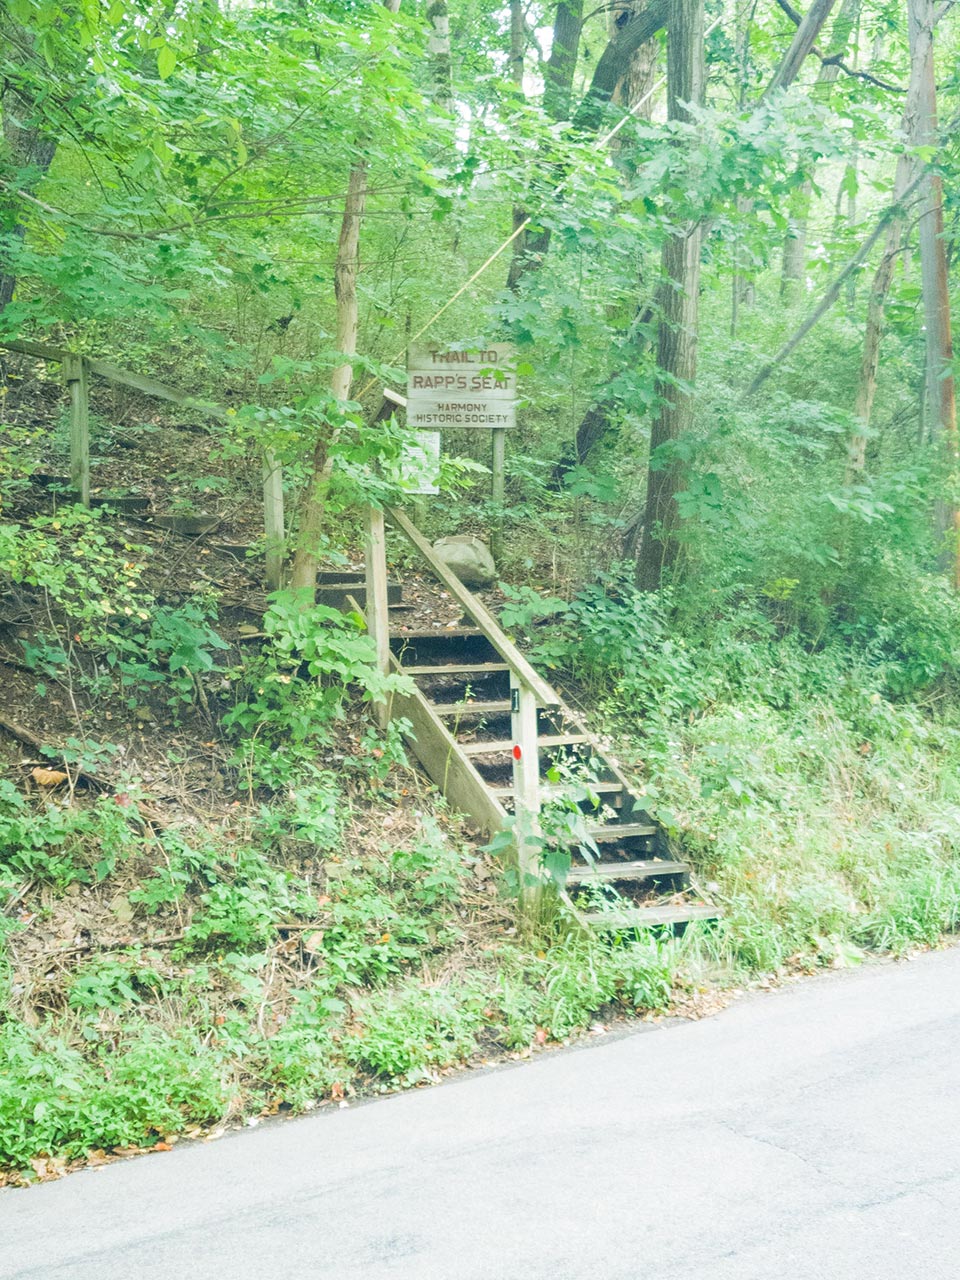 Rapp's Seat stairs